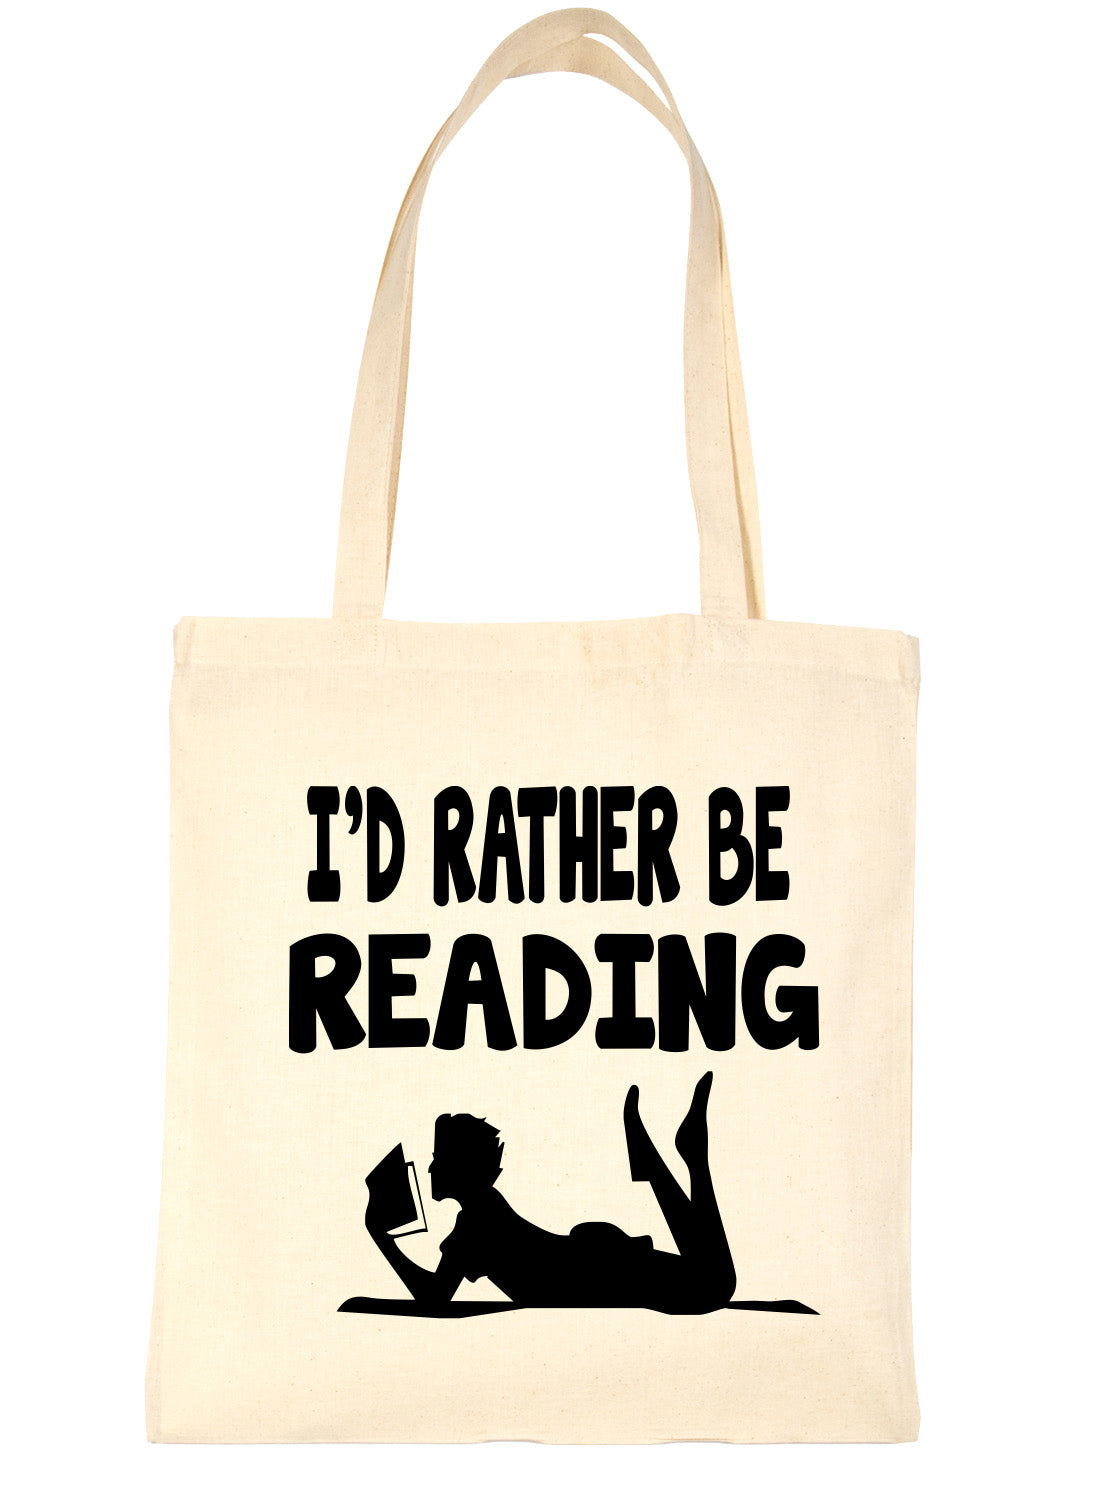 I'd Rather Be Reading Shopping Tote Bag Ladies Gift